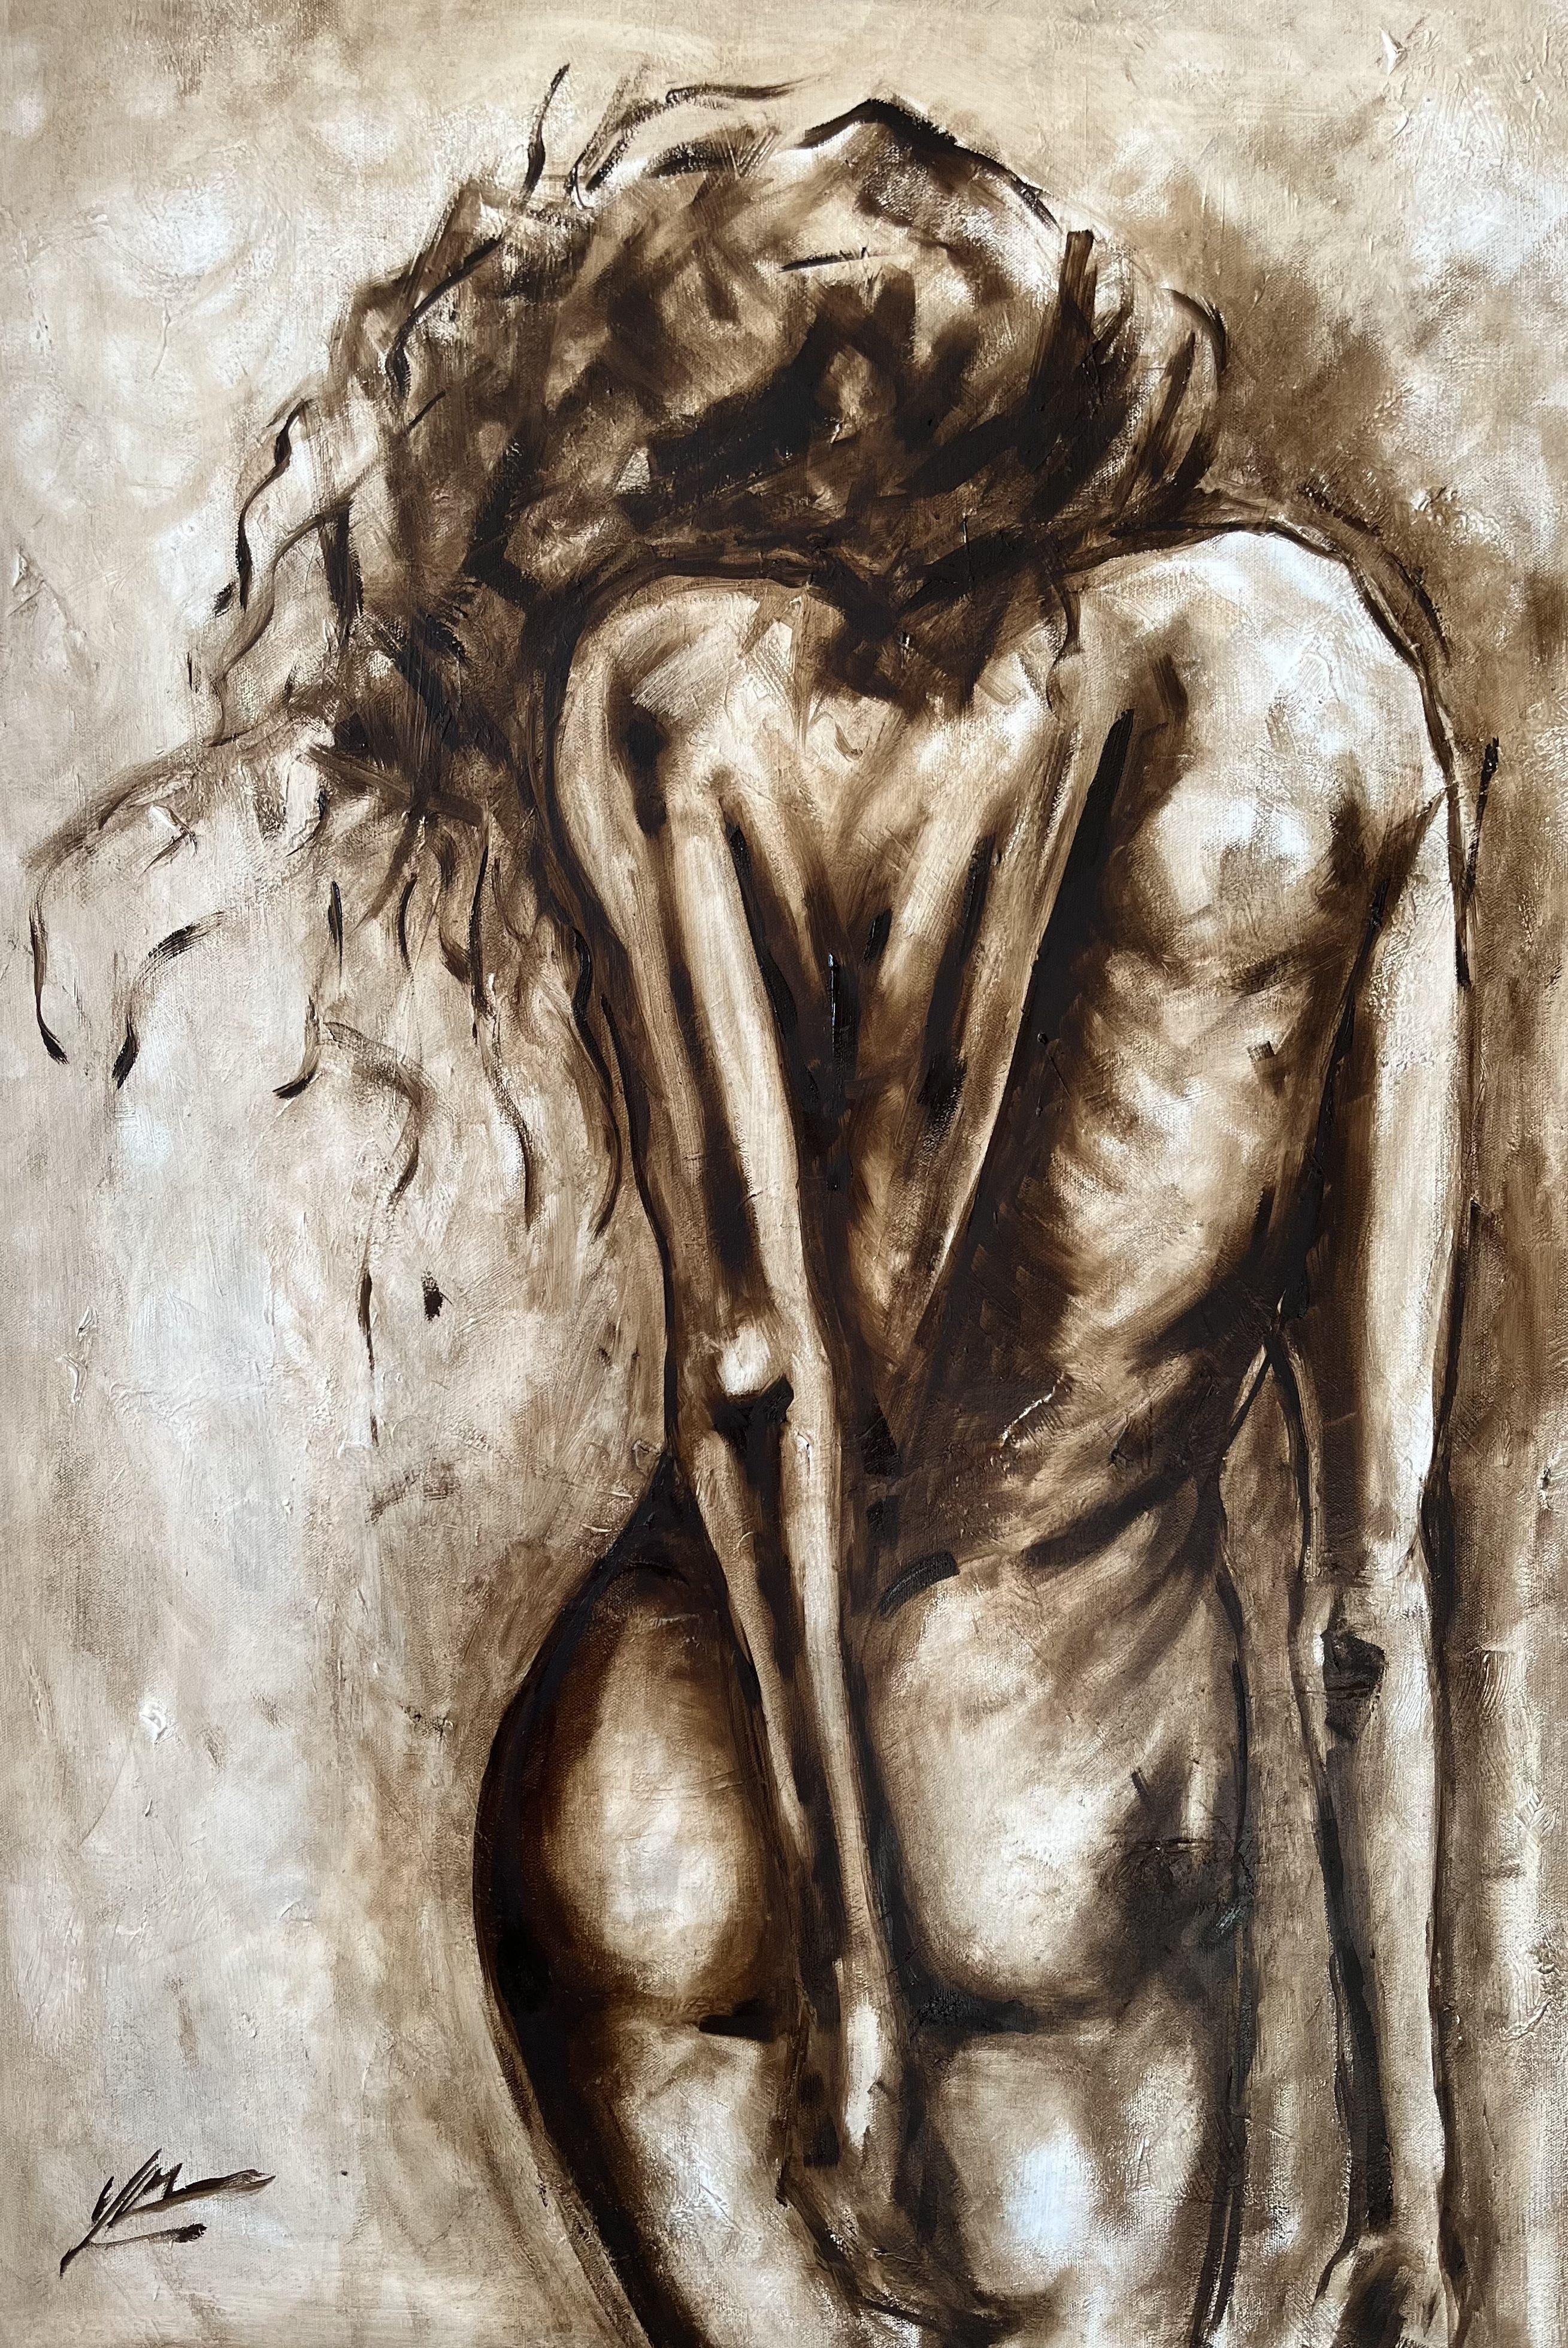 An original oil painting on canvas by the Artist James Shipton.    Here James aims to capture the beauty and elegance of the female whilst capturing the human emotions.    The painting comes with a certificate of authenticity.    Block canvas. Frame